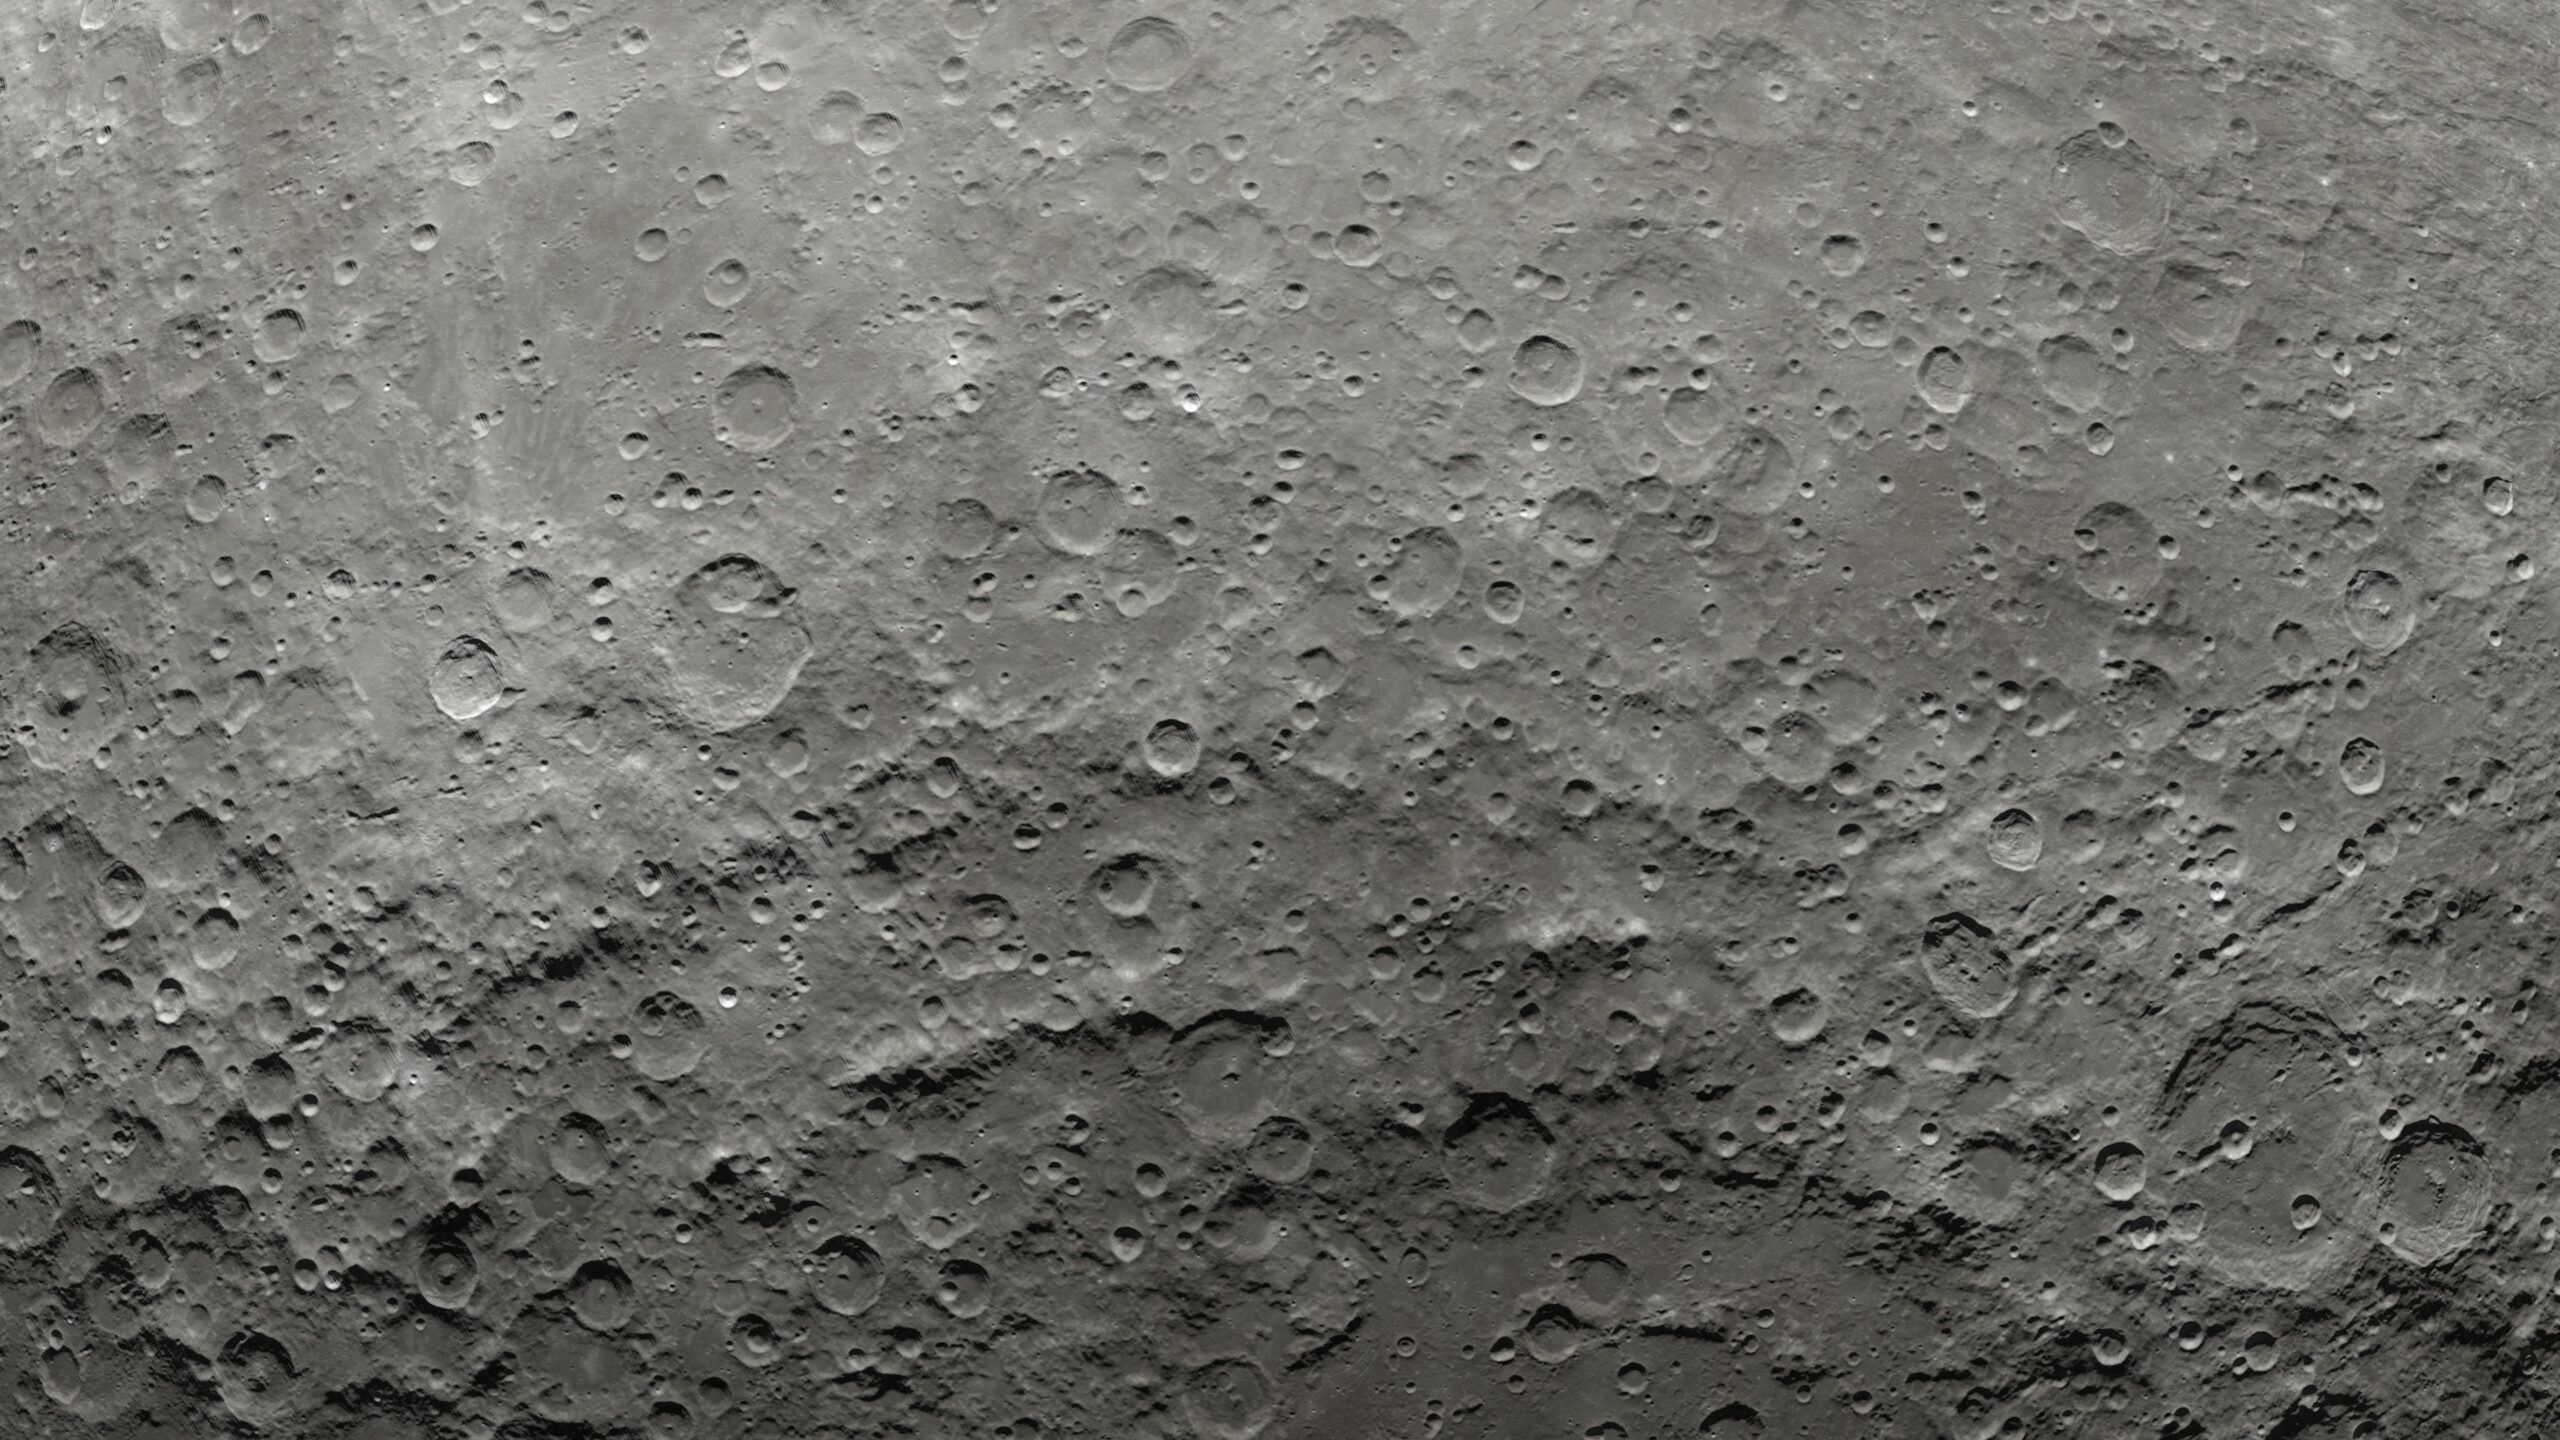 Moon surface rotation with a lot of crater.